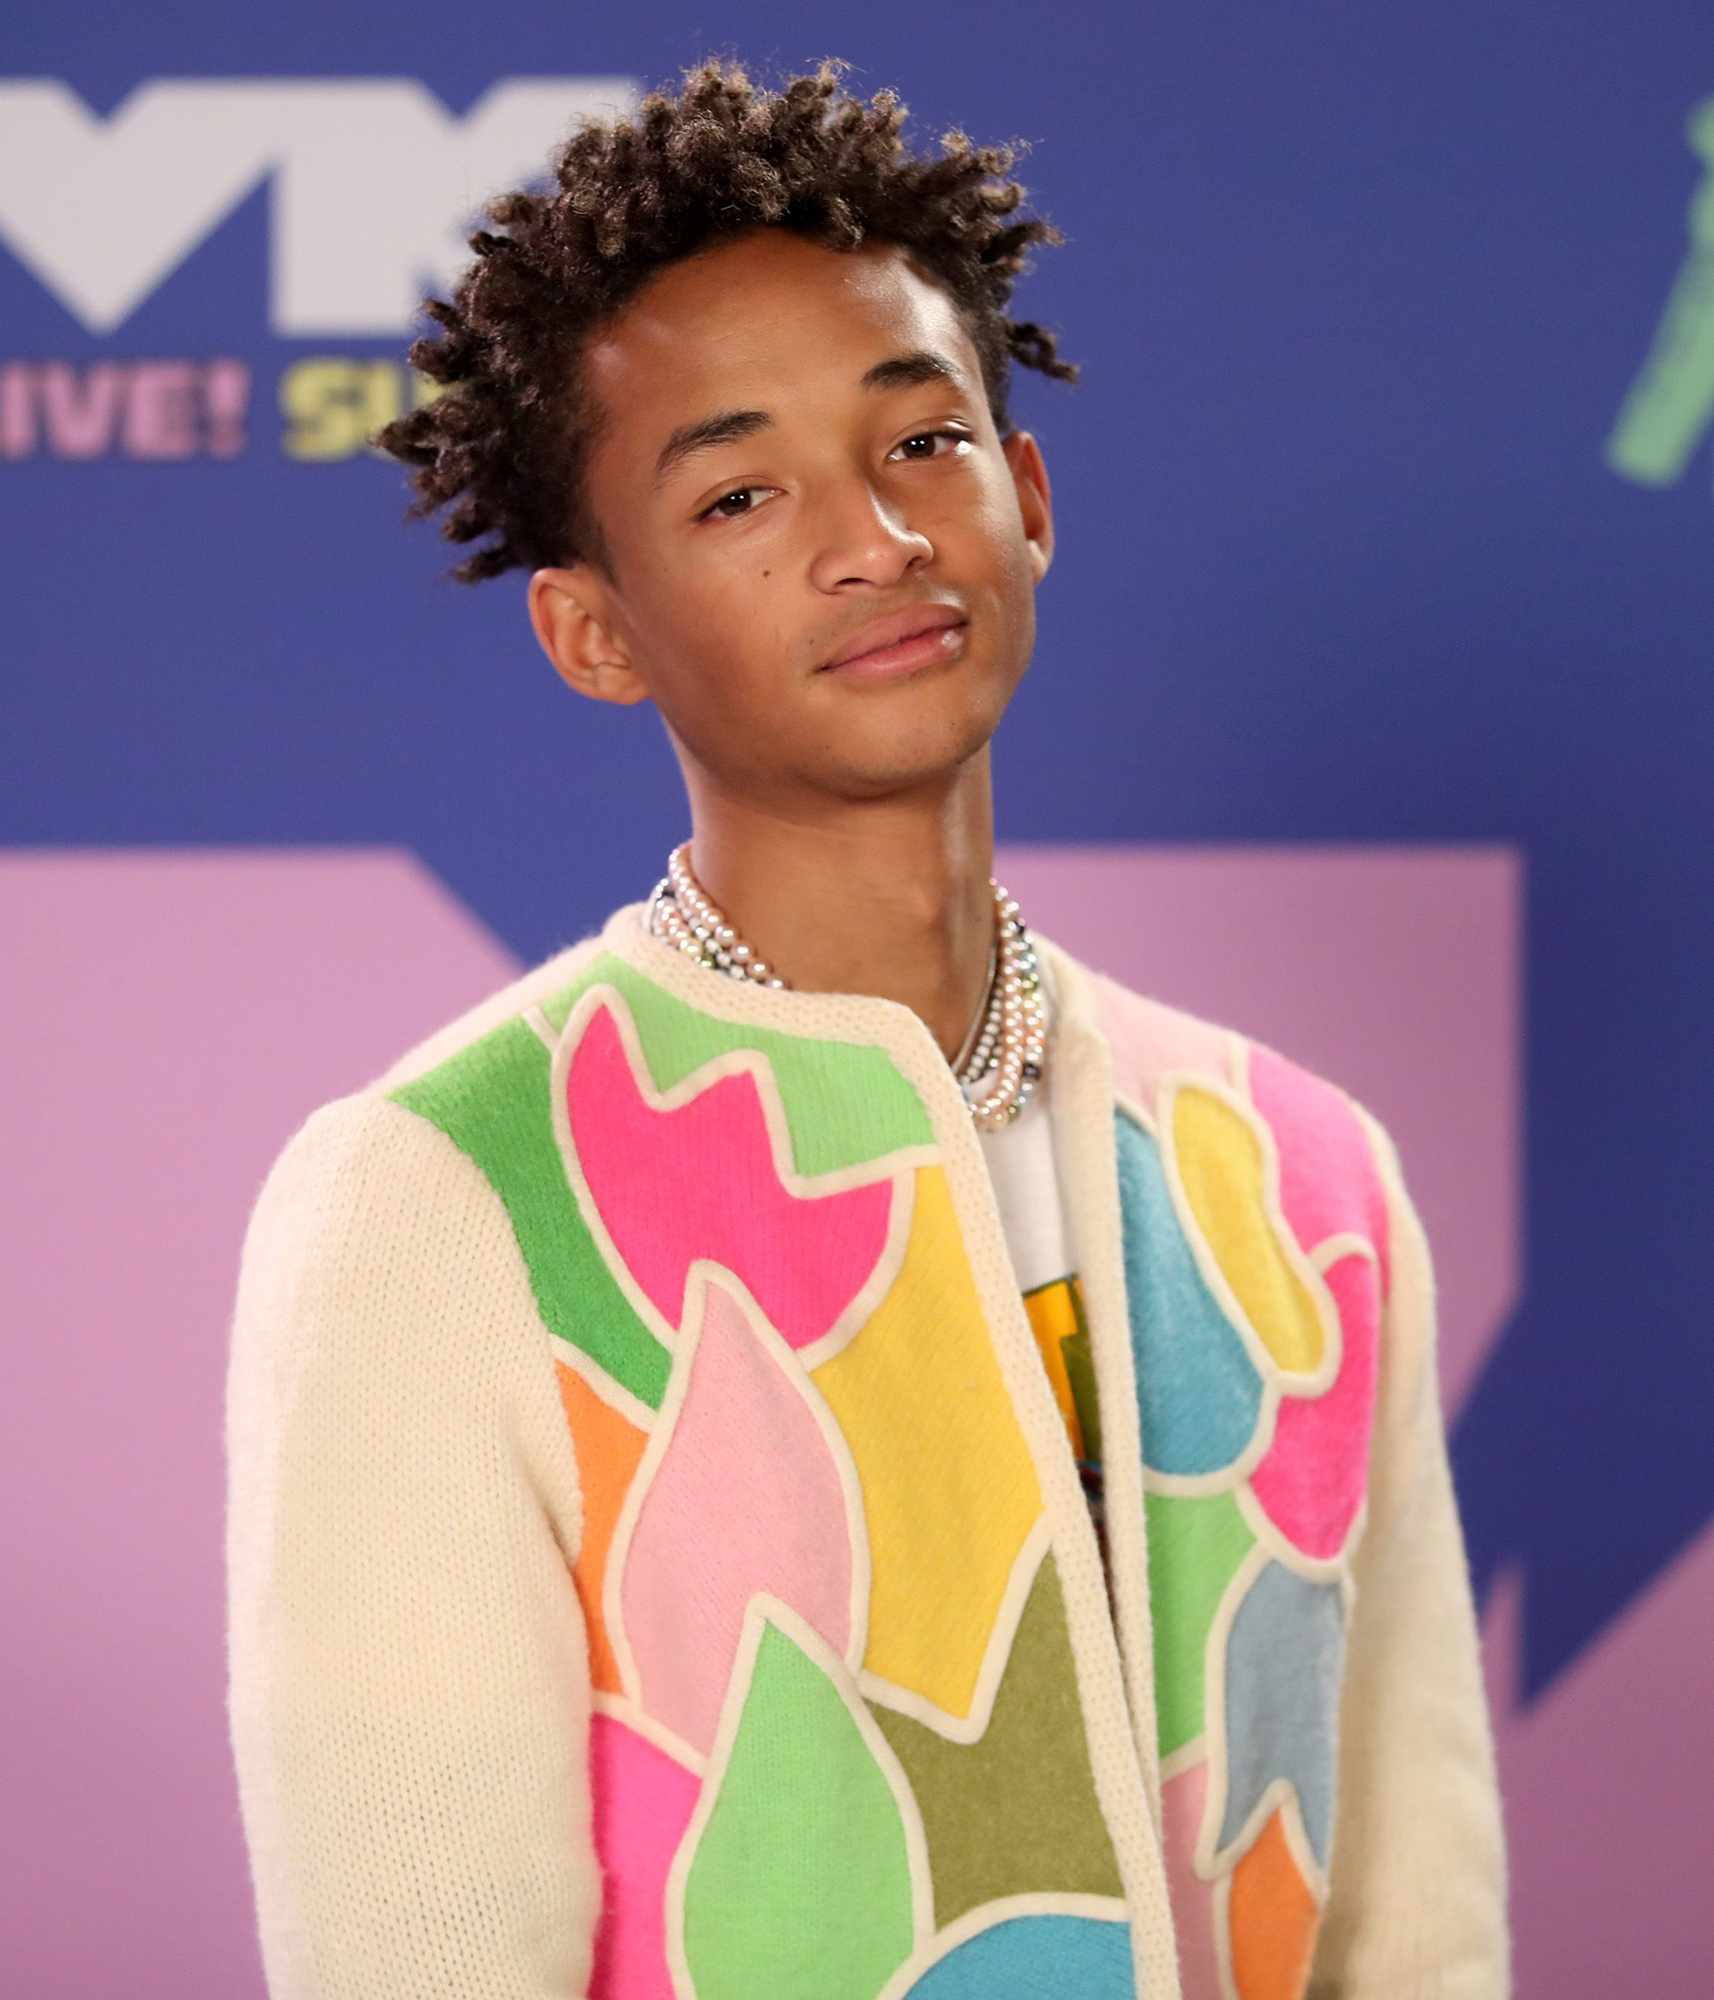 Jaden Smith attends the 2020 MTV Video Music Awards, broadcast on Sunday, August 30th 2020